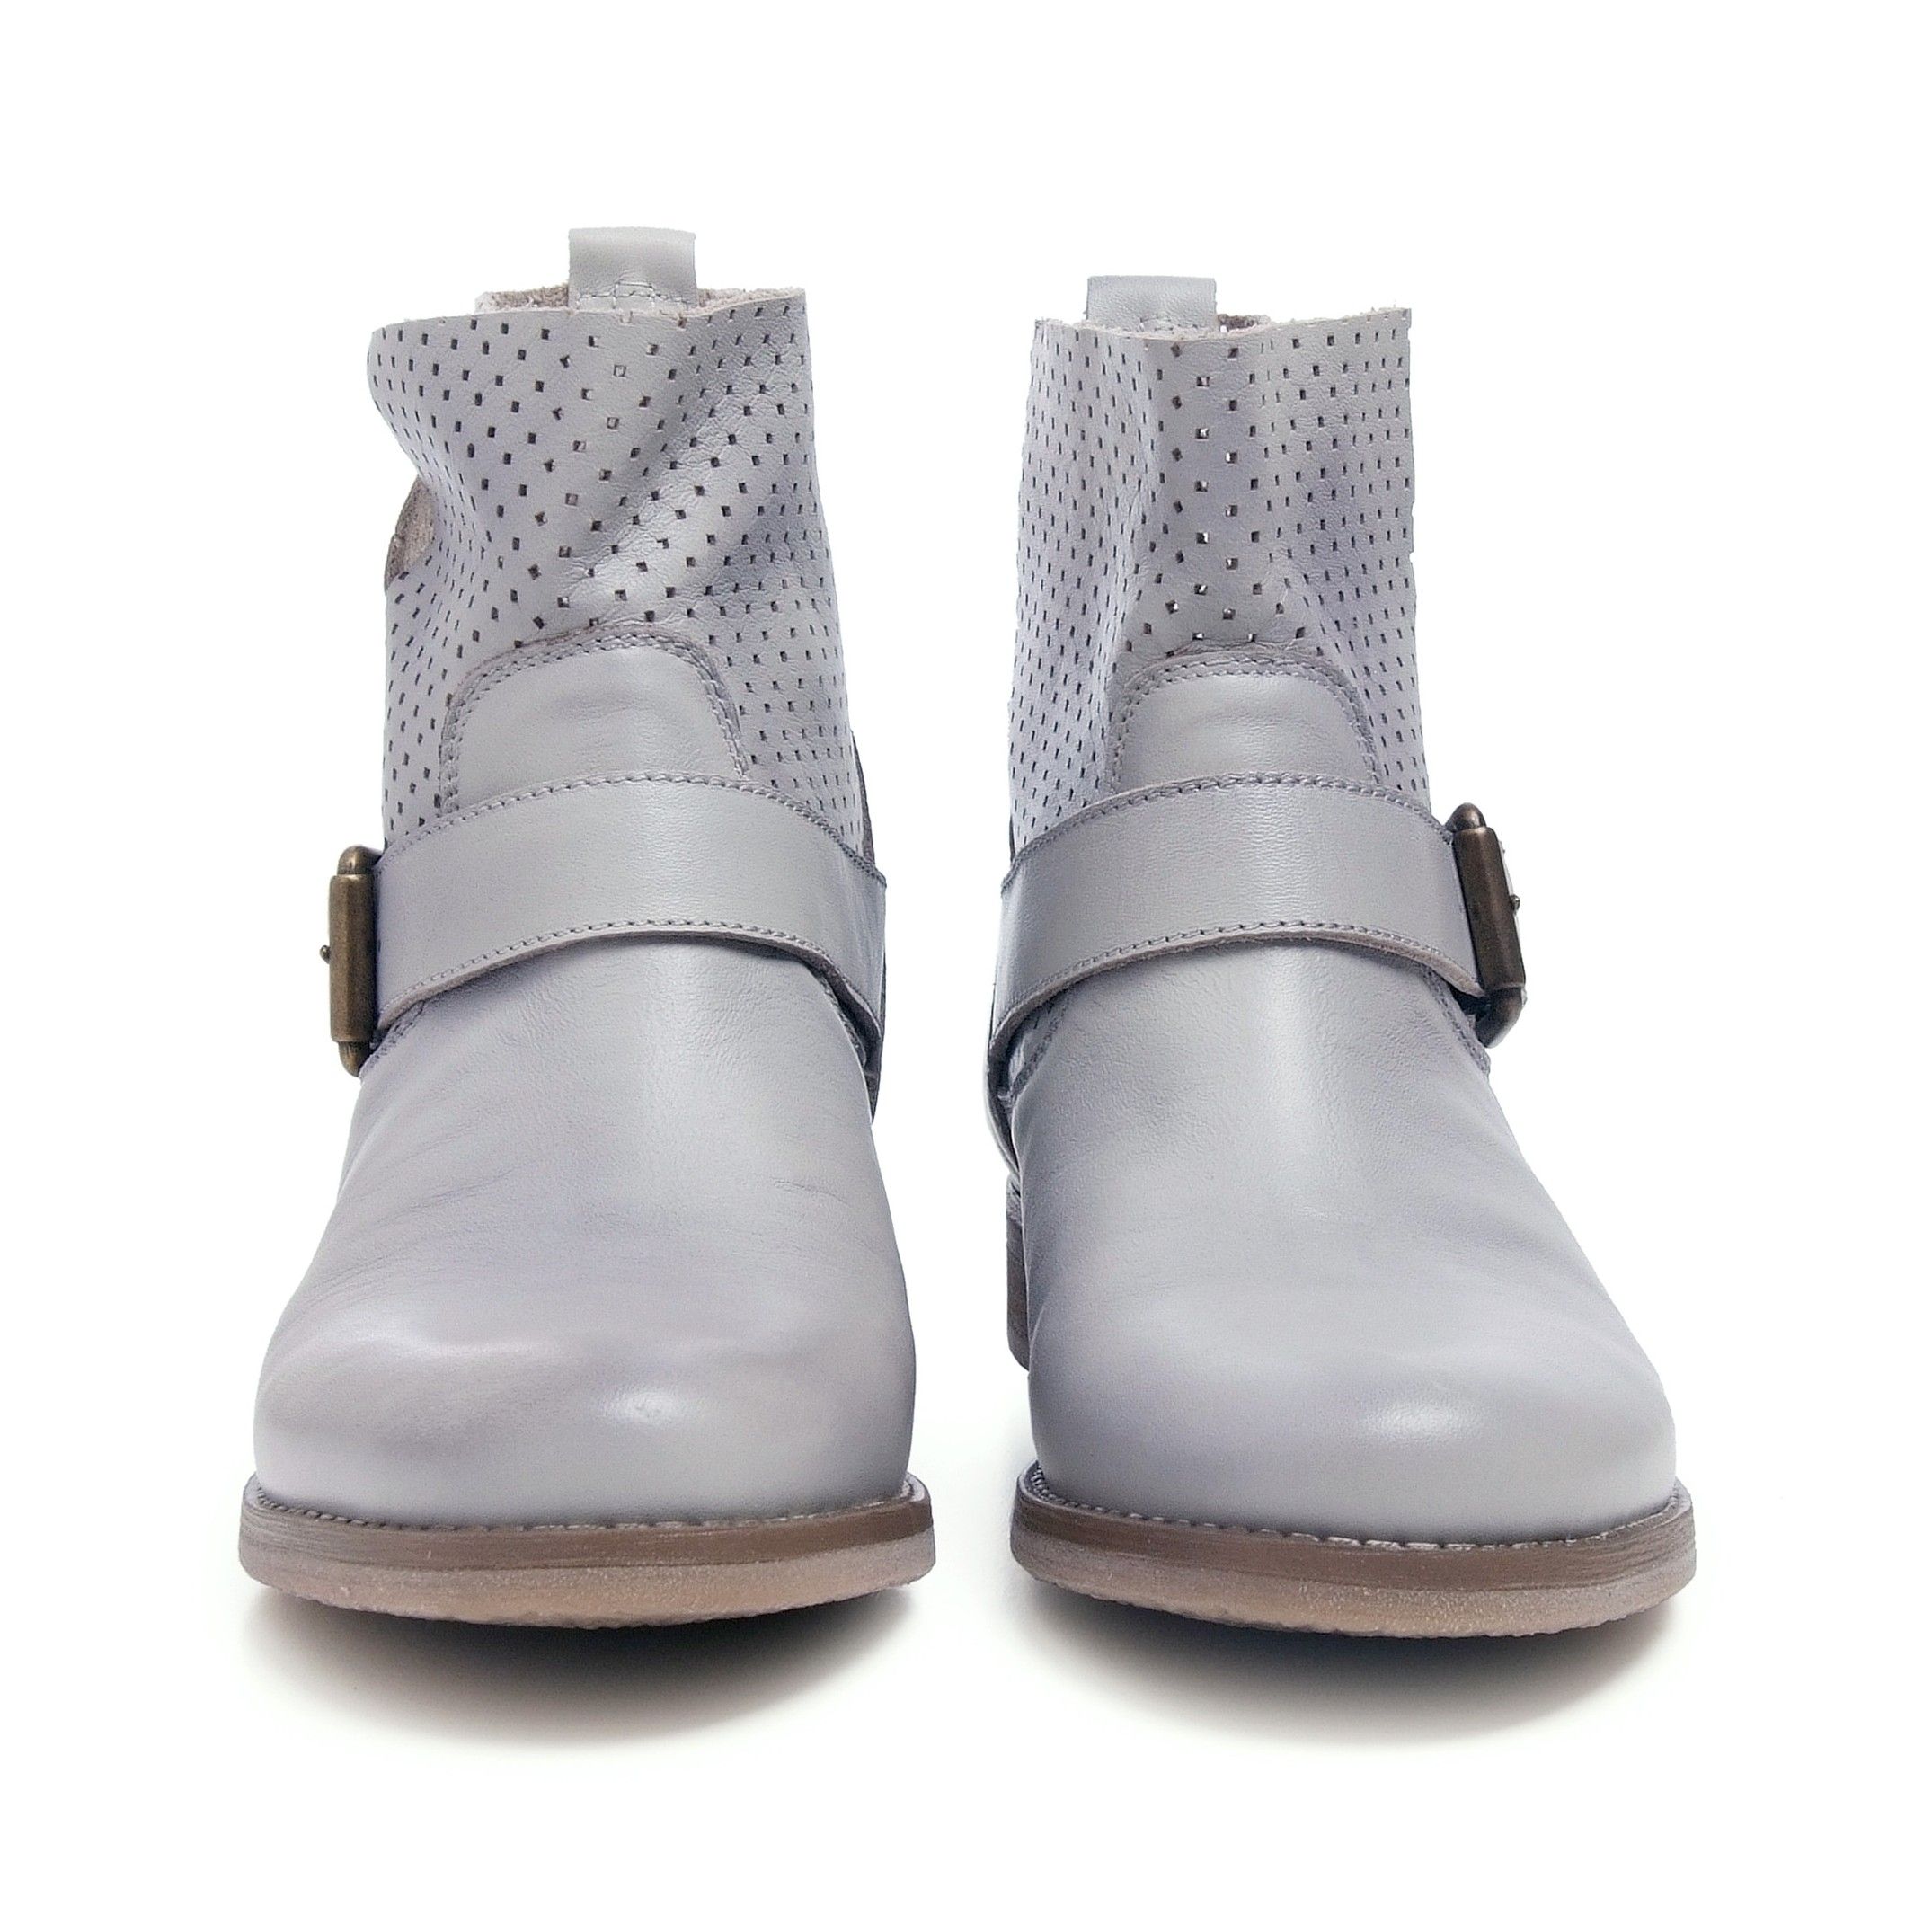 Leather bootie with metal buckle on the side . Upper: leather. Inner and insole made of natural leather. Insole: leather. Heel: 2,5 cm. Sole: Non-skid rubber. MADE IN SPAIN.